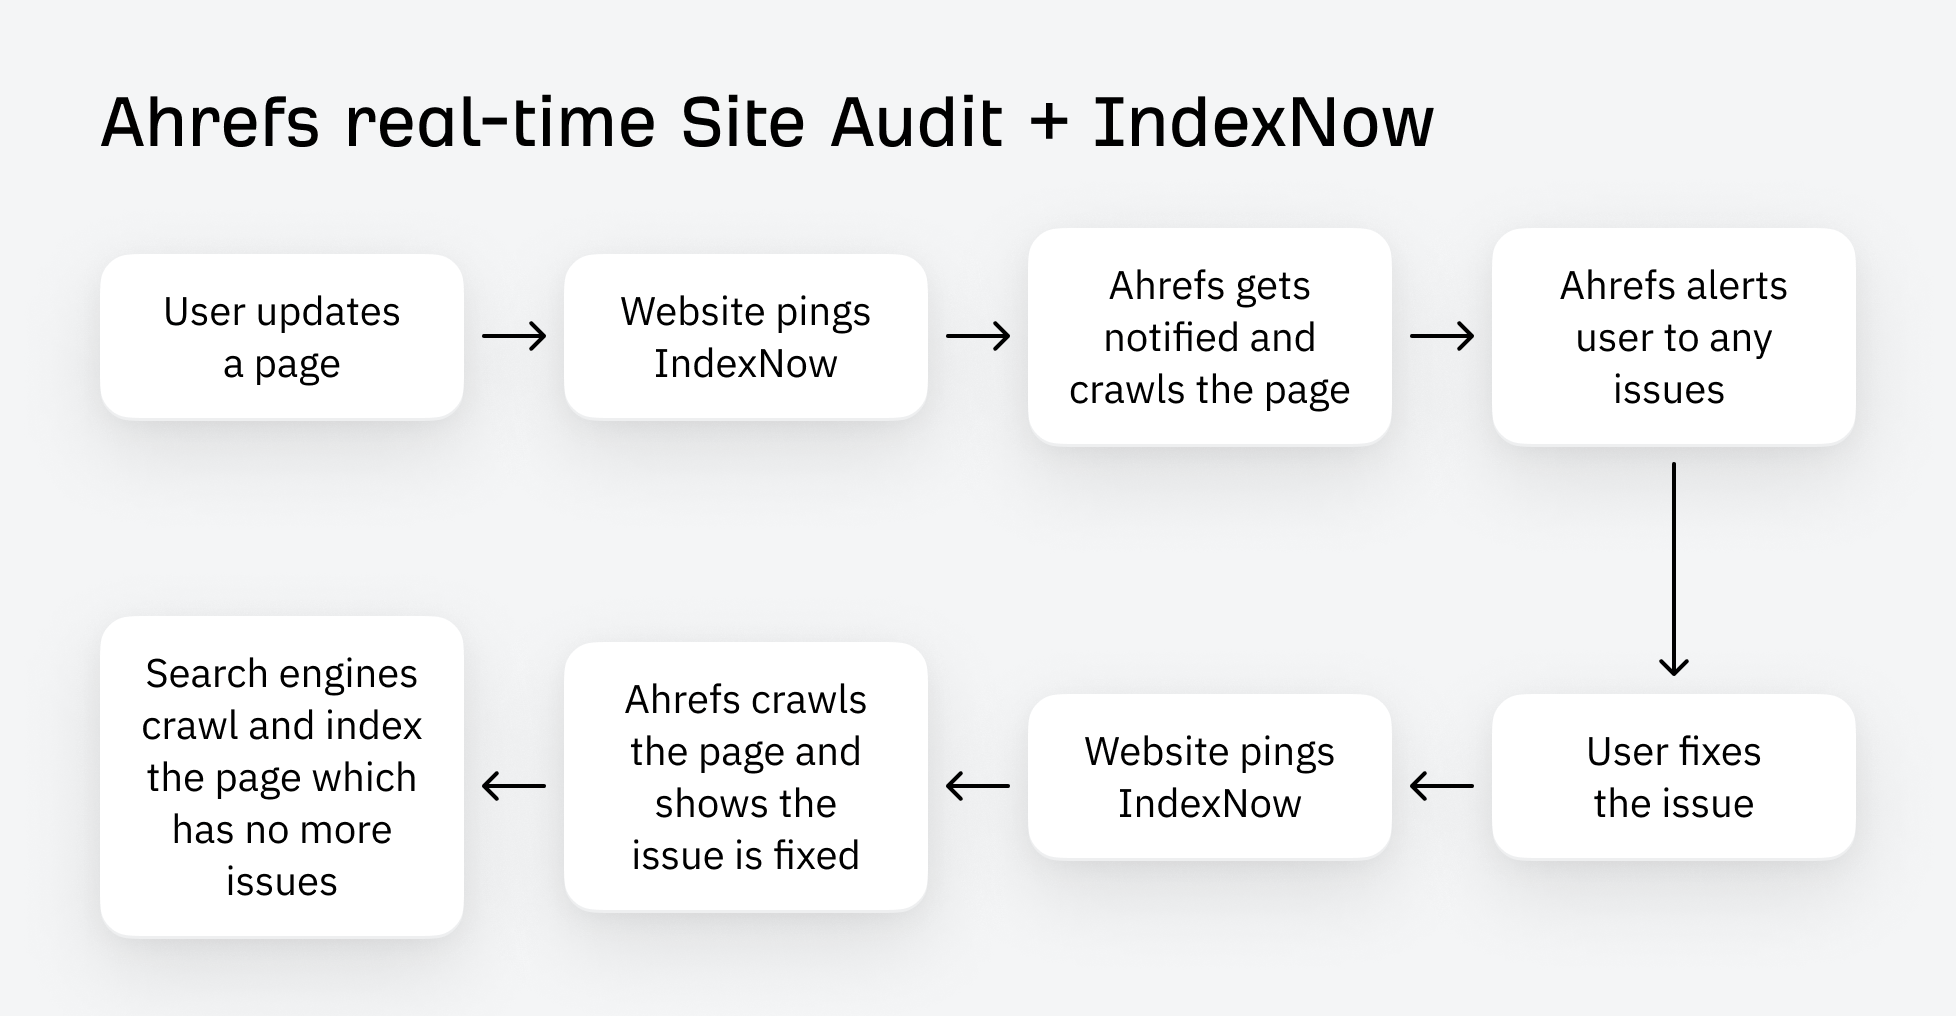 How Ahrefs' real-time site audit will work with IndexNow.